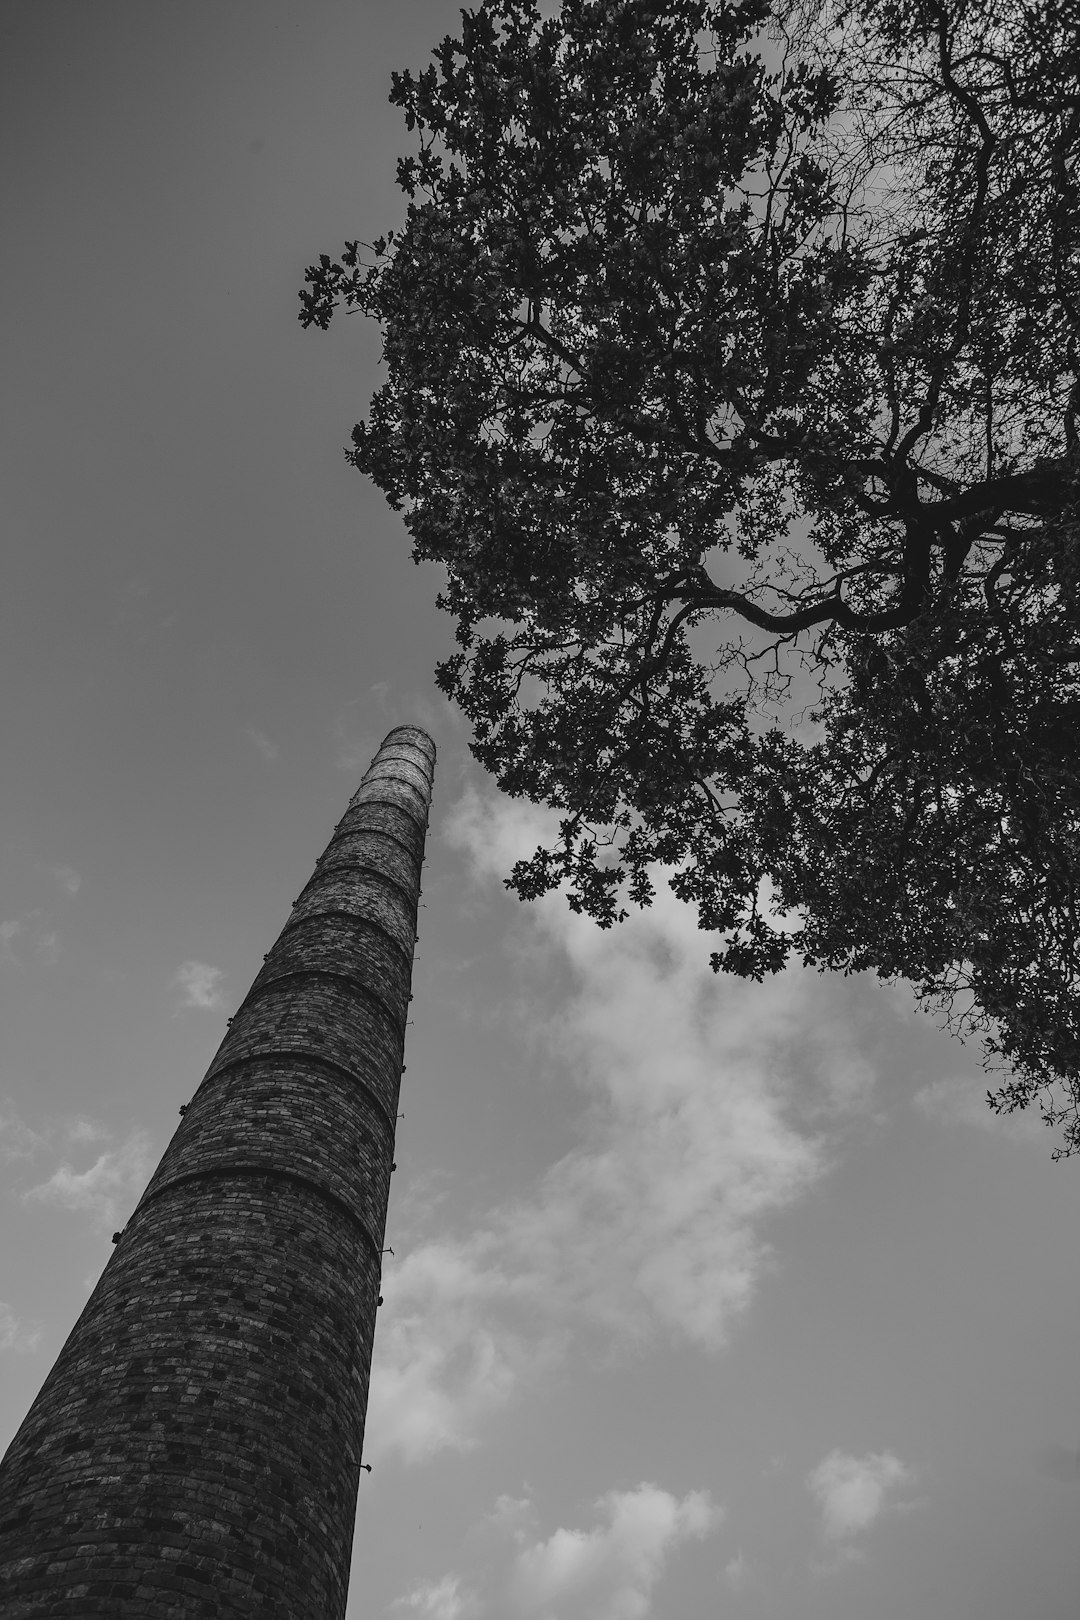 grayscale photography of concrete tower and tree